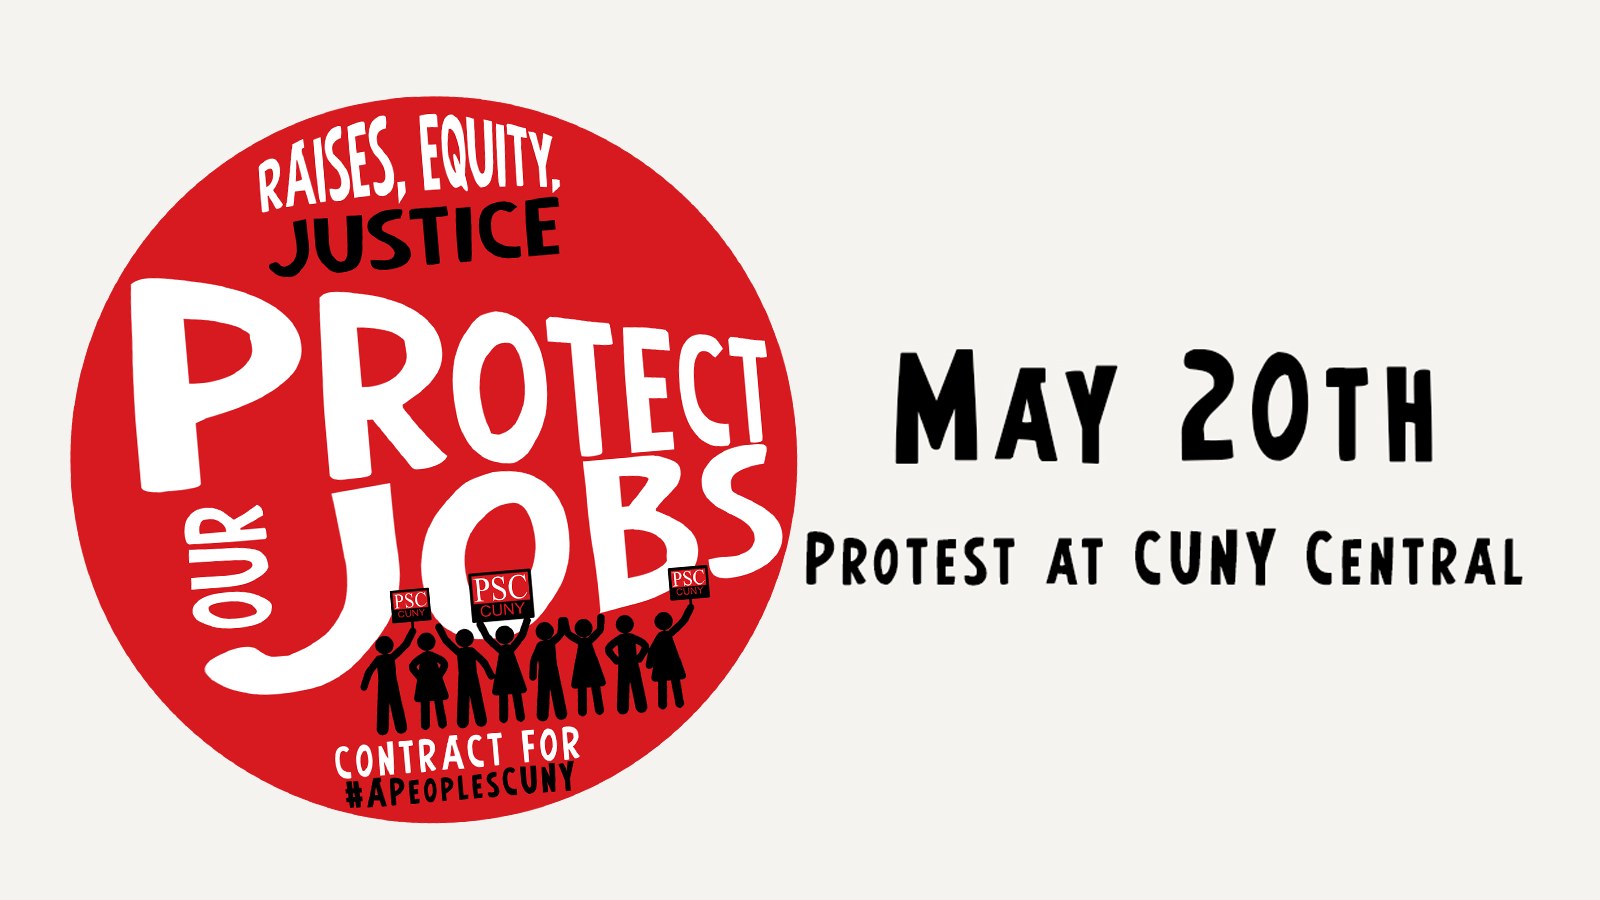 May 20th Protest at CUNY Central